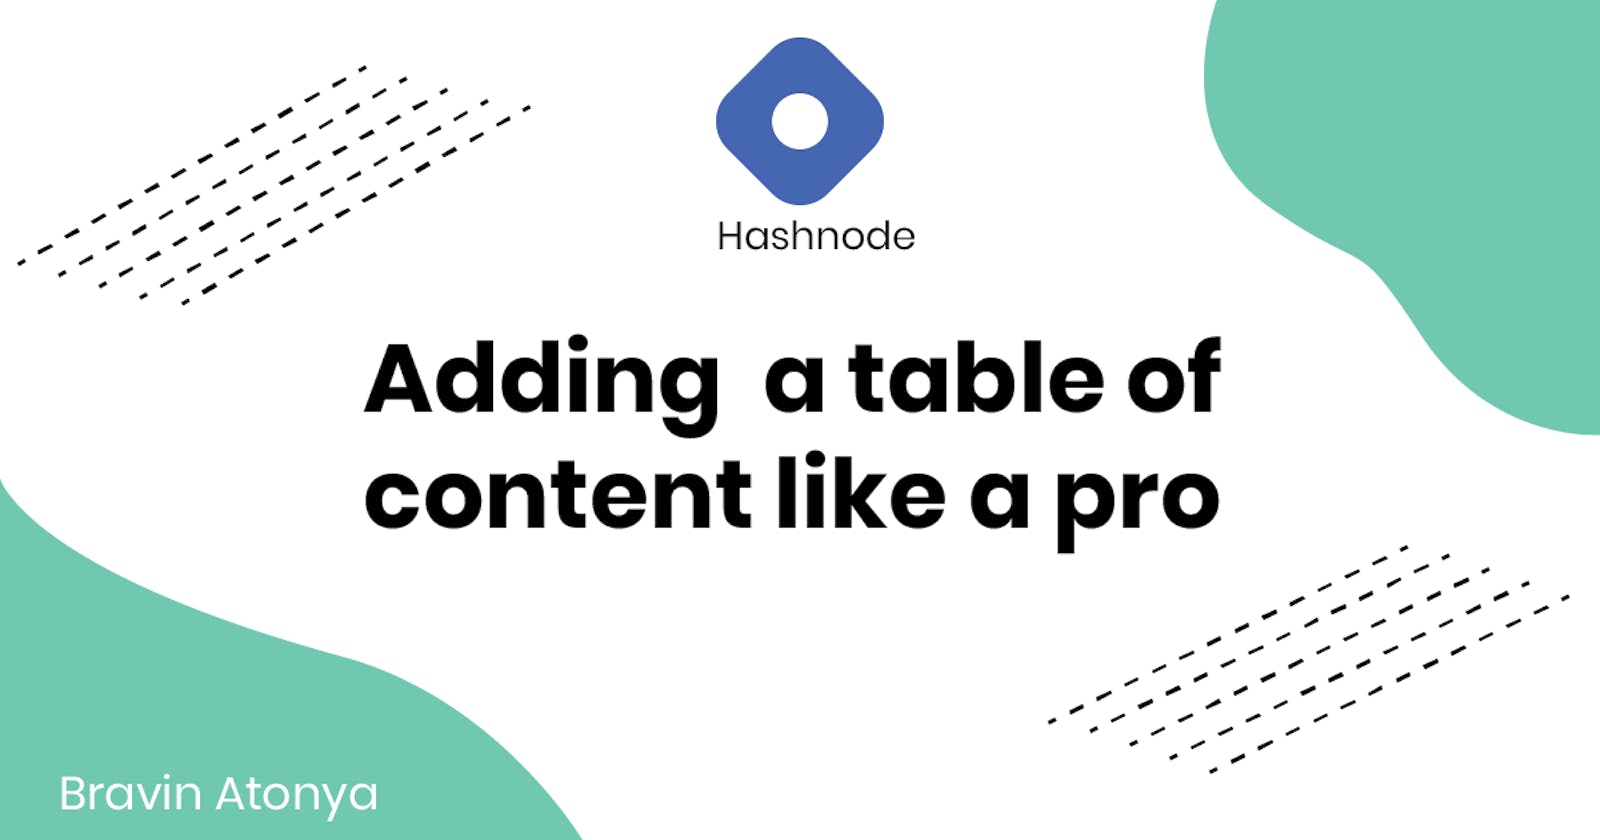 Adding a table of content.